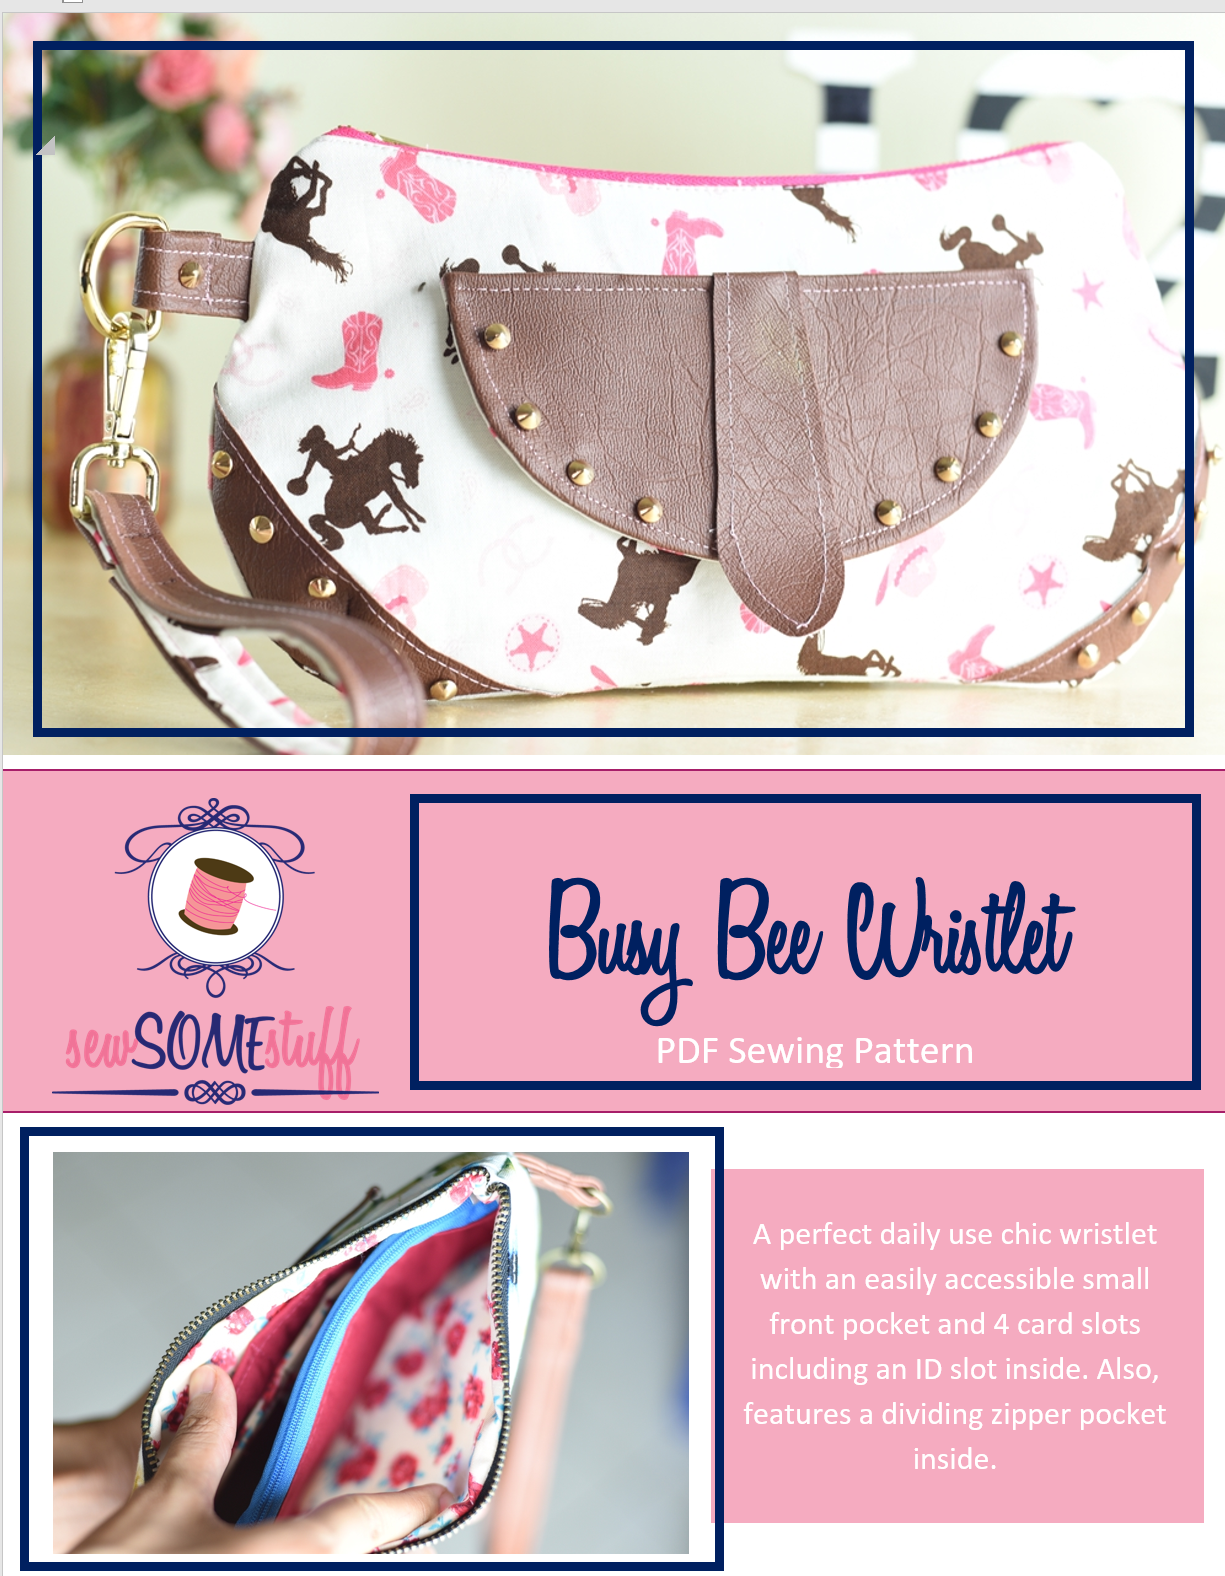 busy bee wristlet sewing pattern | bag sewing patterns | purse patterns | handbag patterns